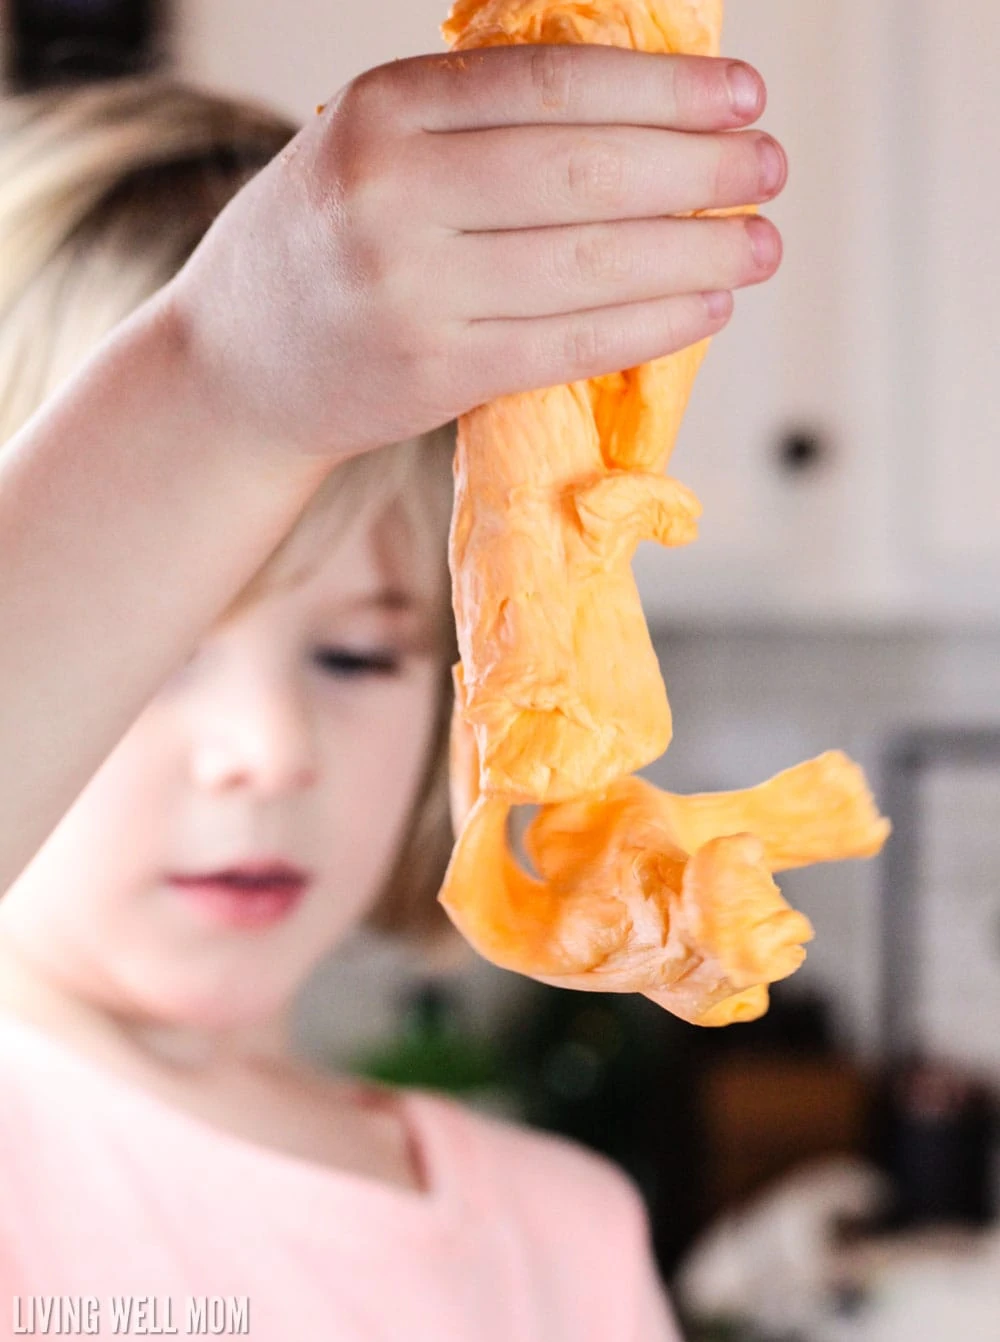 Child playing with orange fluffy slime